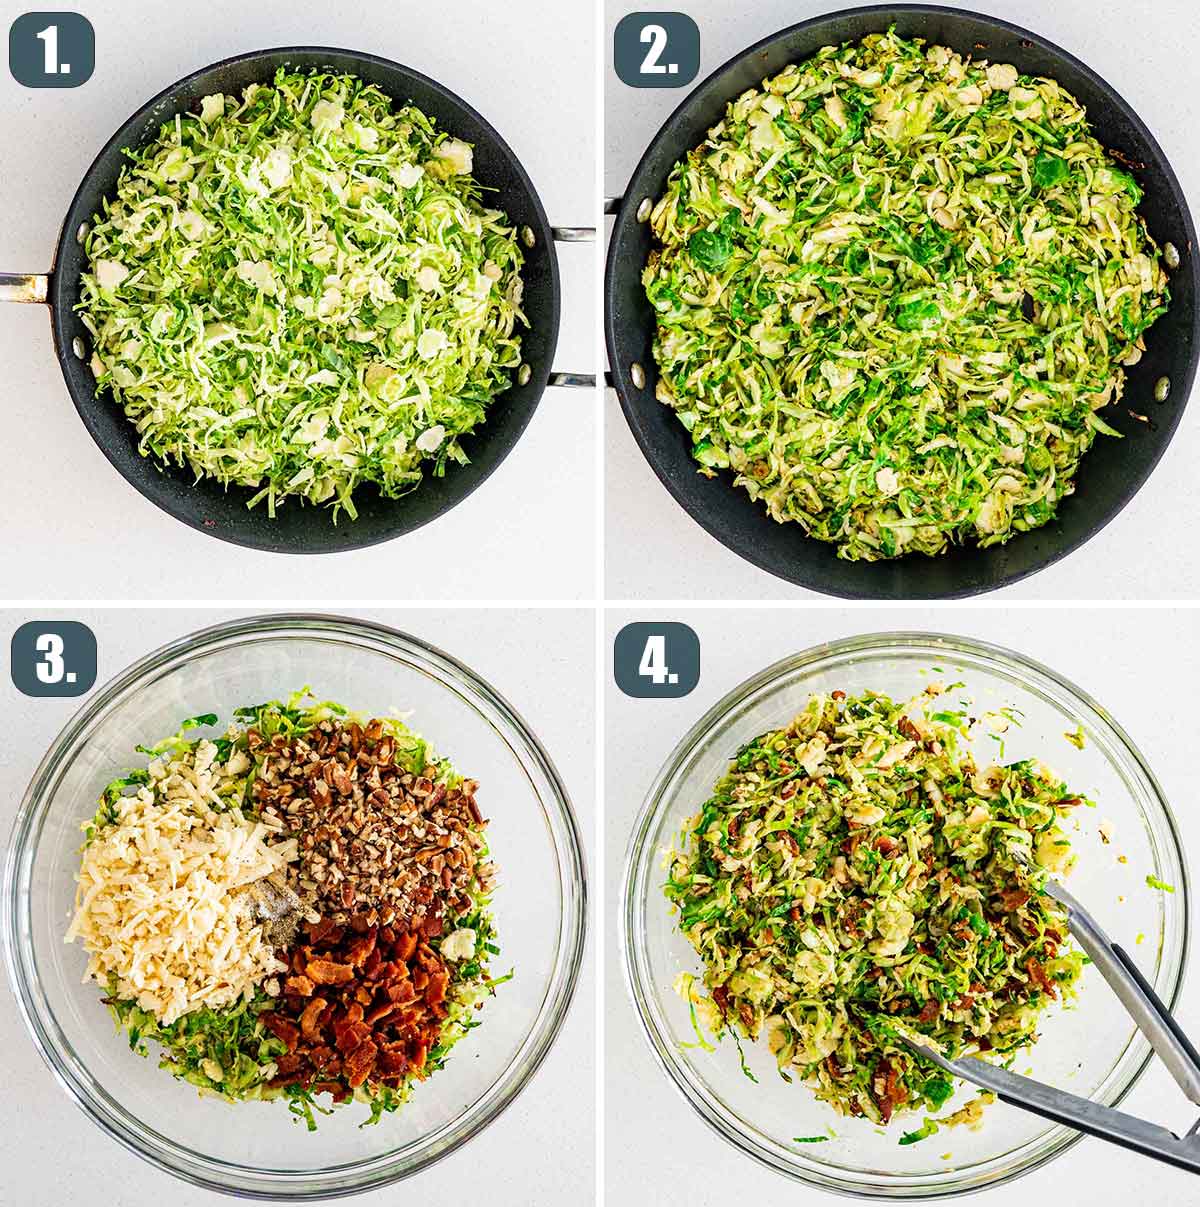 detailed process shots showing how to make brussels sprouts salad.